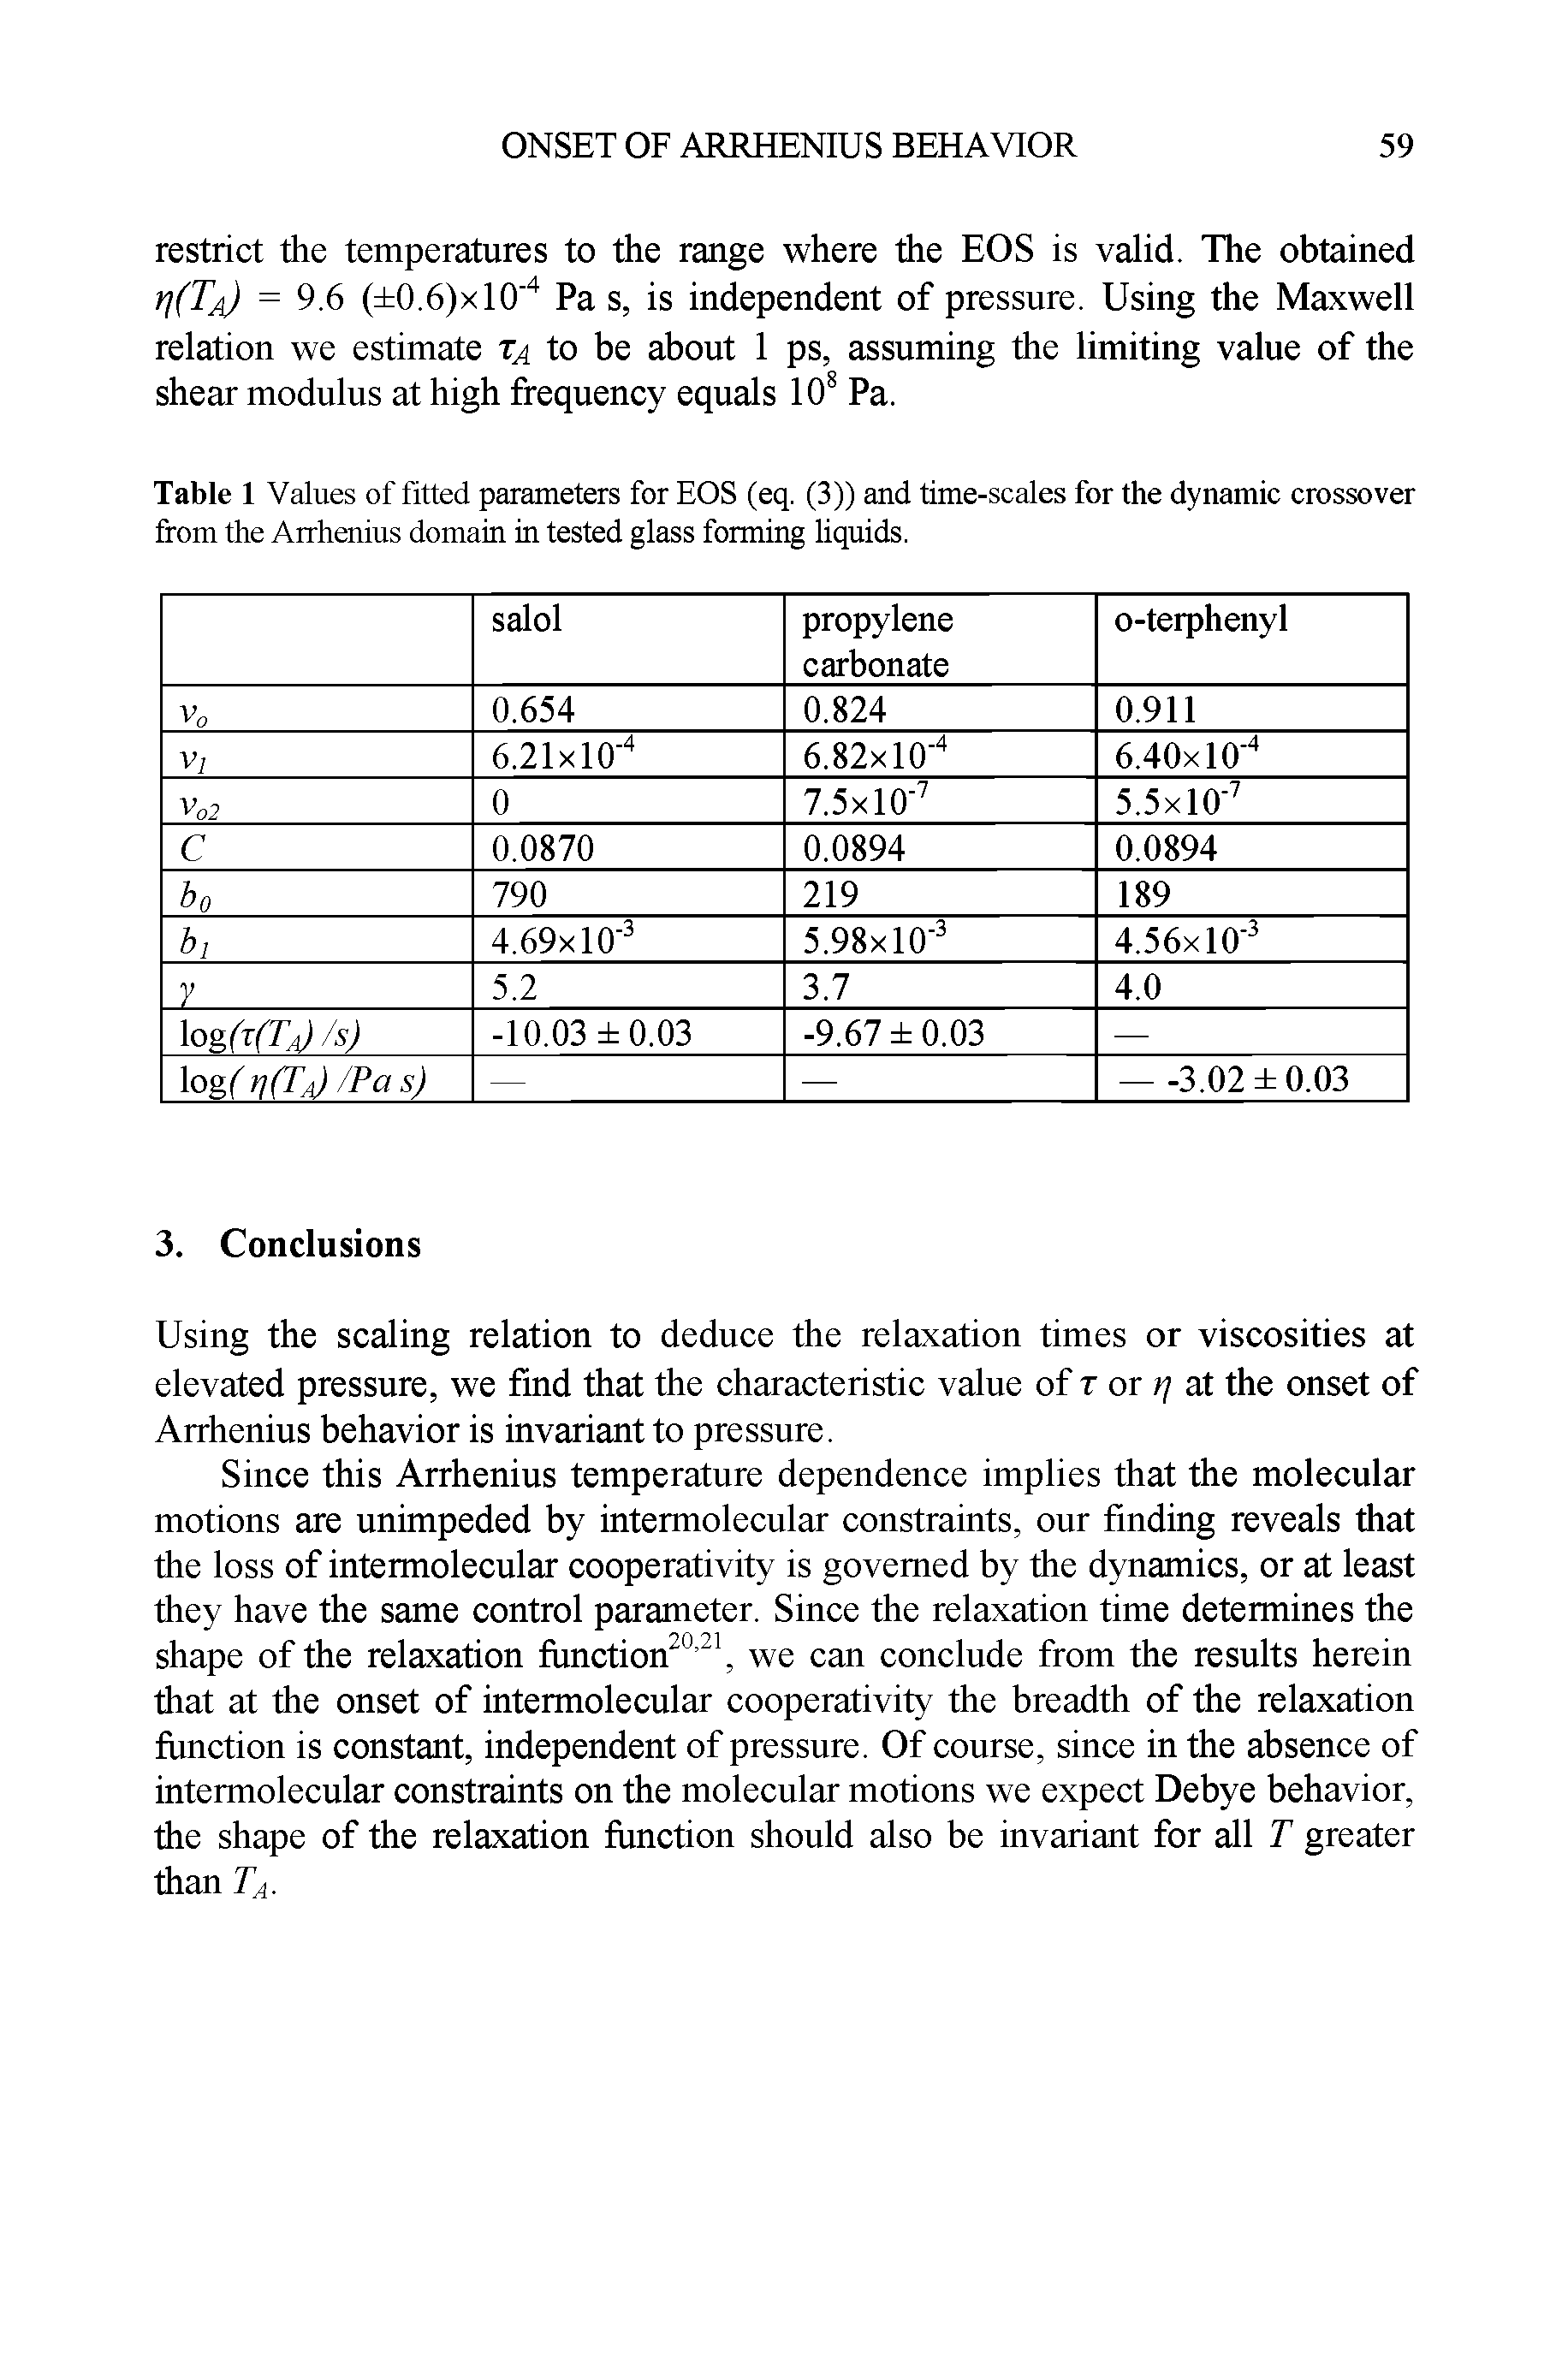 Table 1 Values of fitted parameters for EOS (eq. (3)) and time-scales for the dynamic crossover from the Arrhenius domain in tested glass forming liquids.